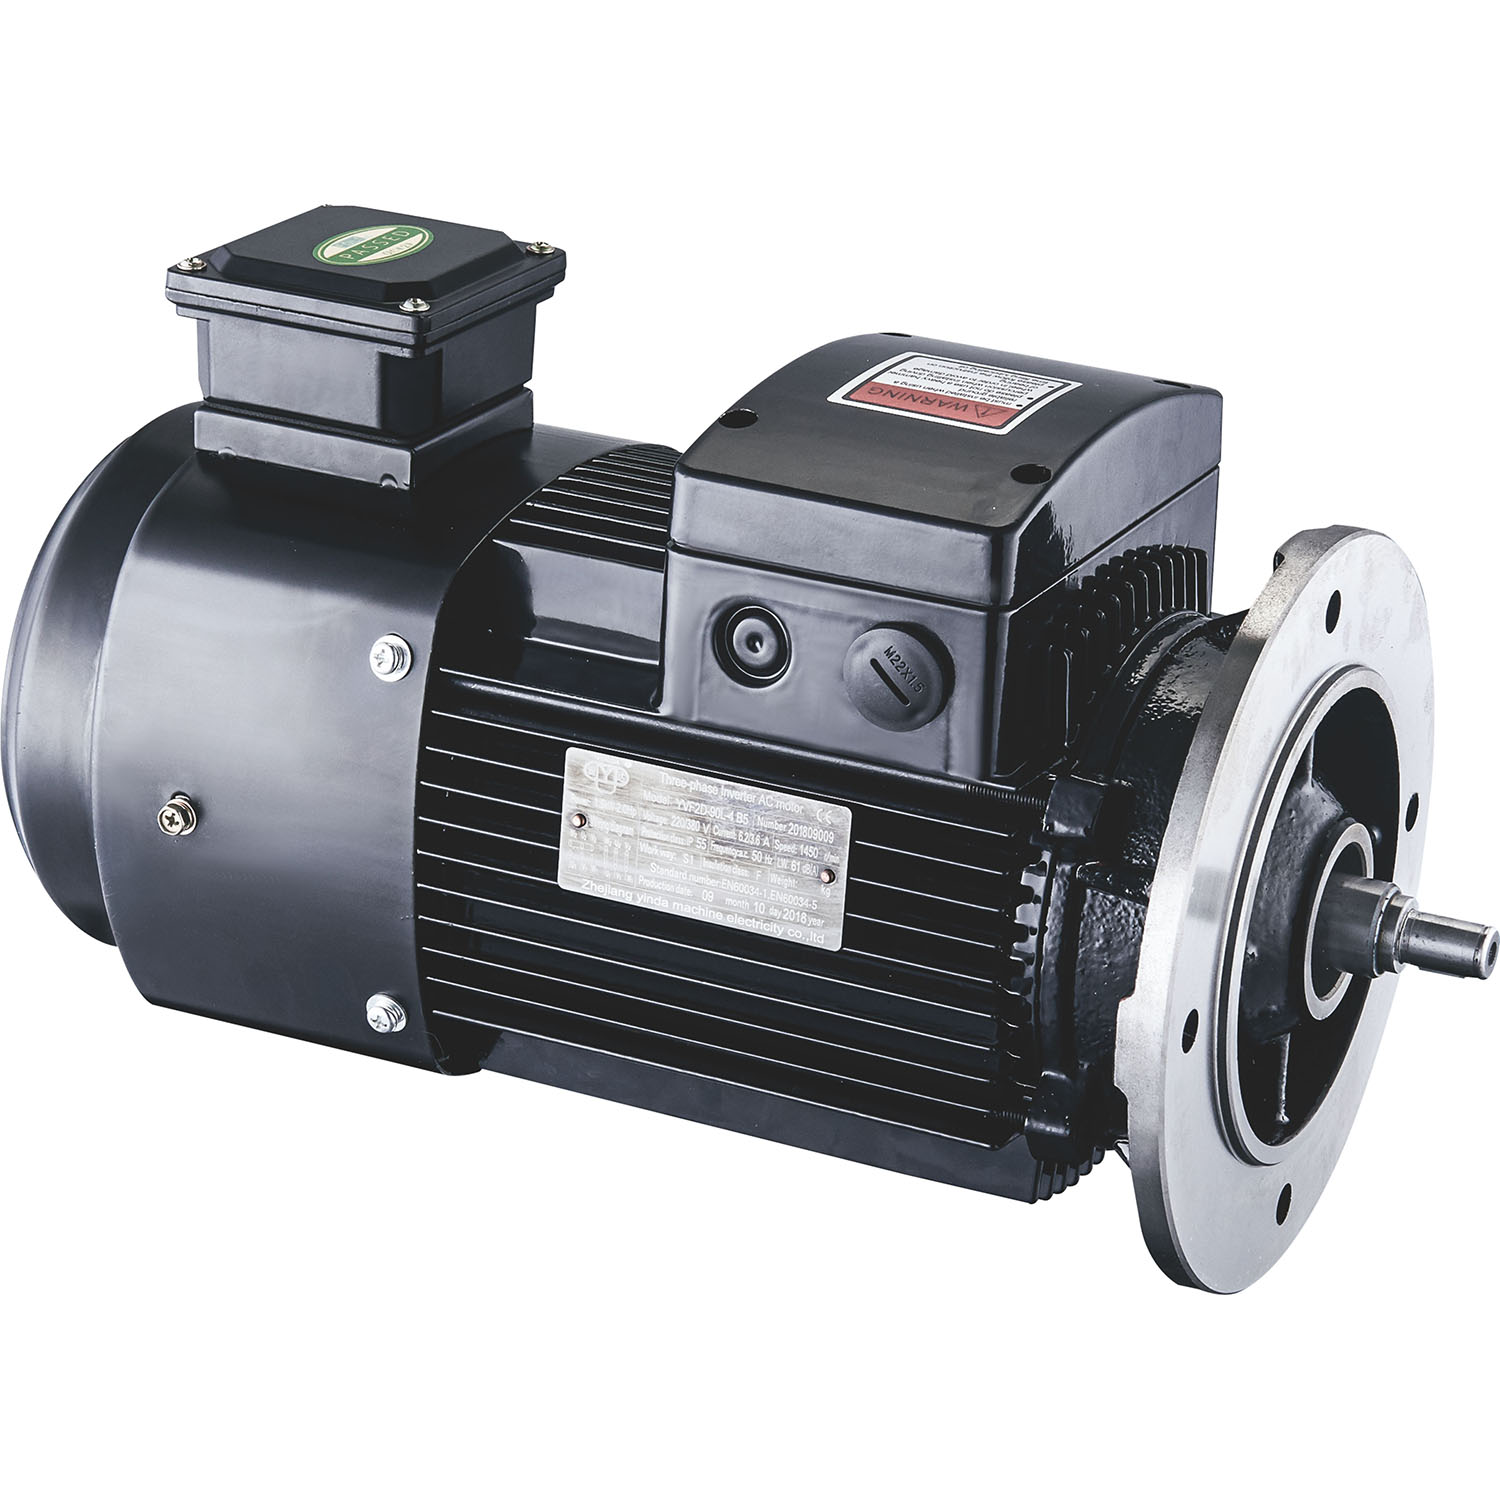 3KW-6P hard tooth surface reducer Four series of high efficiency motors